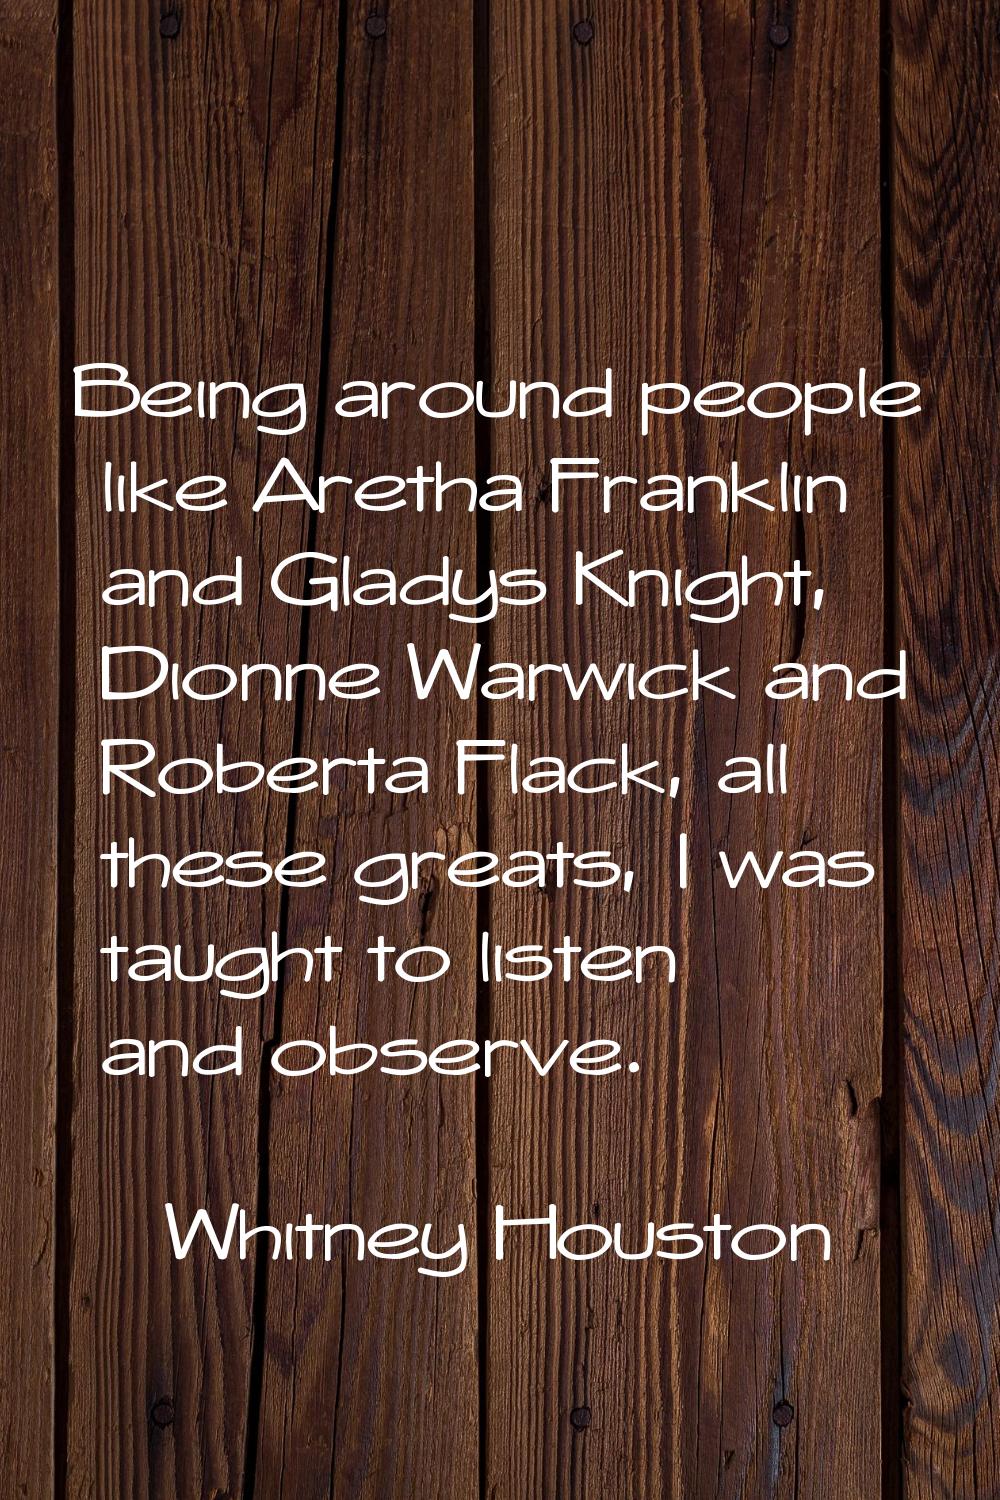 Being around people like Aretha Franklin and Gladys Knight, Dionne Warwick and Roberta Flack, all t